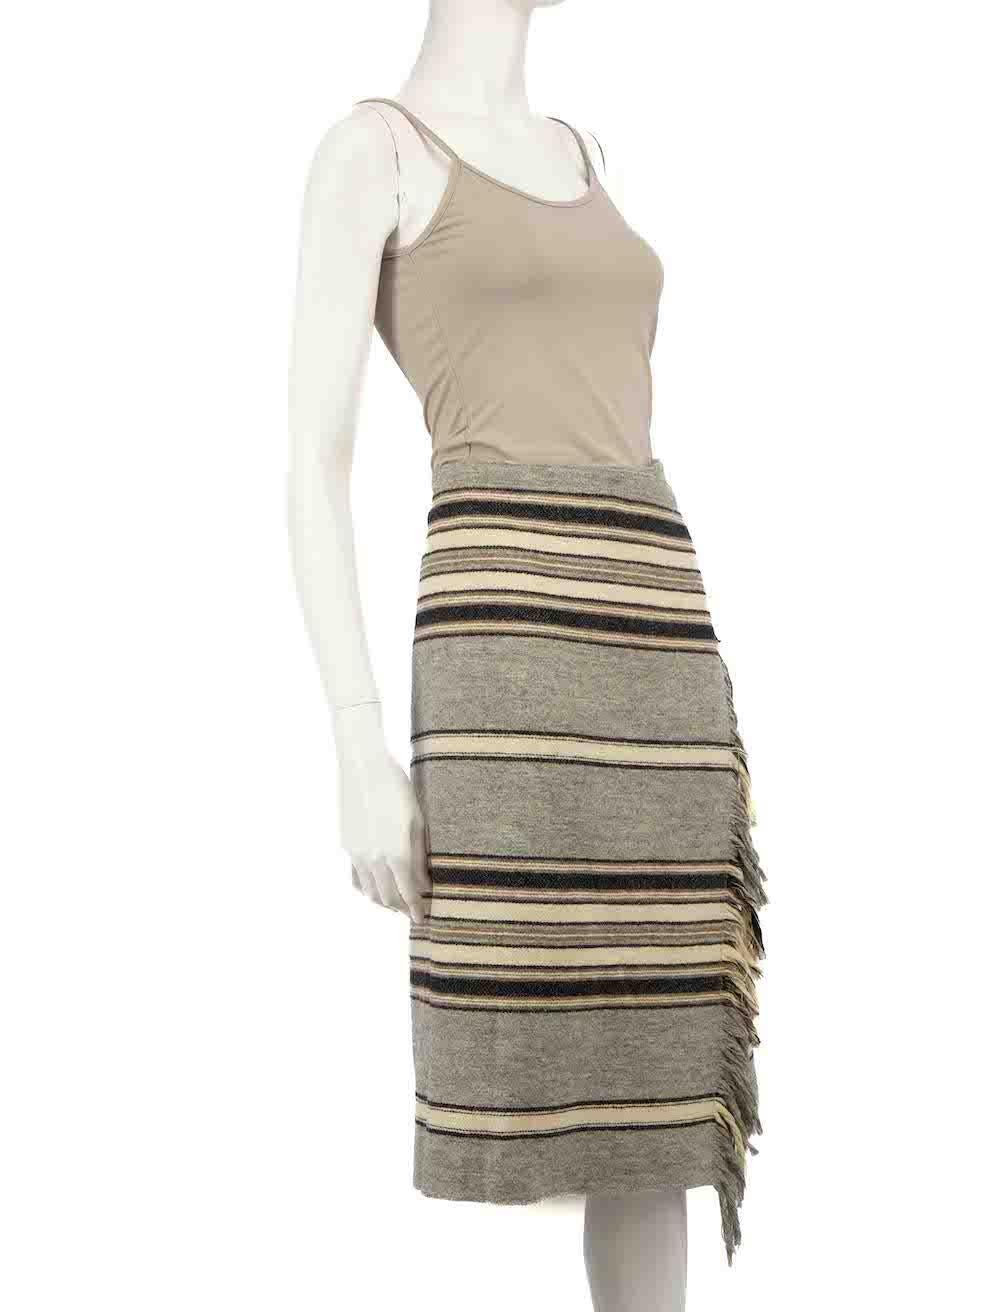 CONDITION is Never worn, with tags. No visible wear to skirt is evident on this new Isabel Marant designer resale item.
 
 
 
 Details
 
 
 Grey
 
 Wool
 
 Wrap skirt
 
 Knee length
 
 Striped pattern
 
 Tassel trimming
 
 Front snap buttons